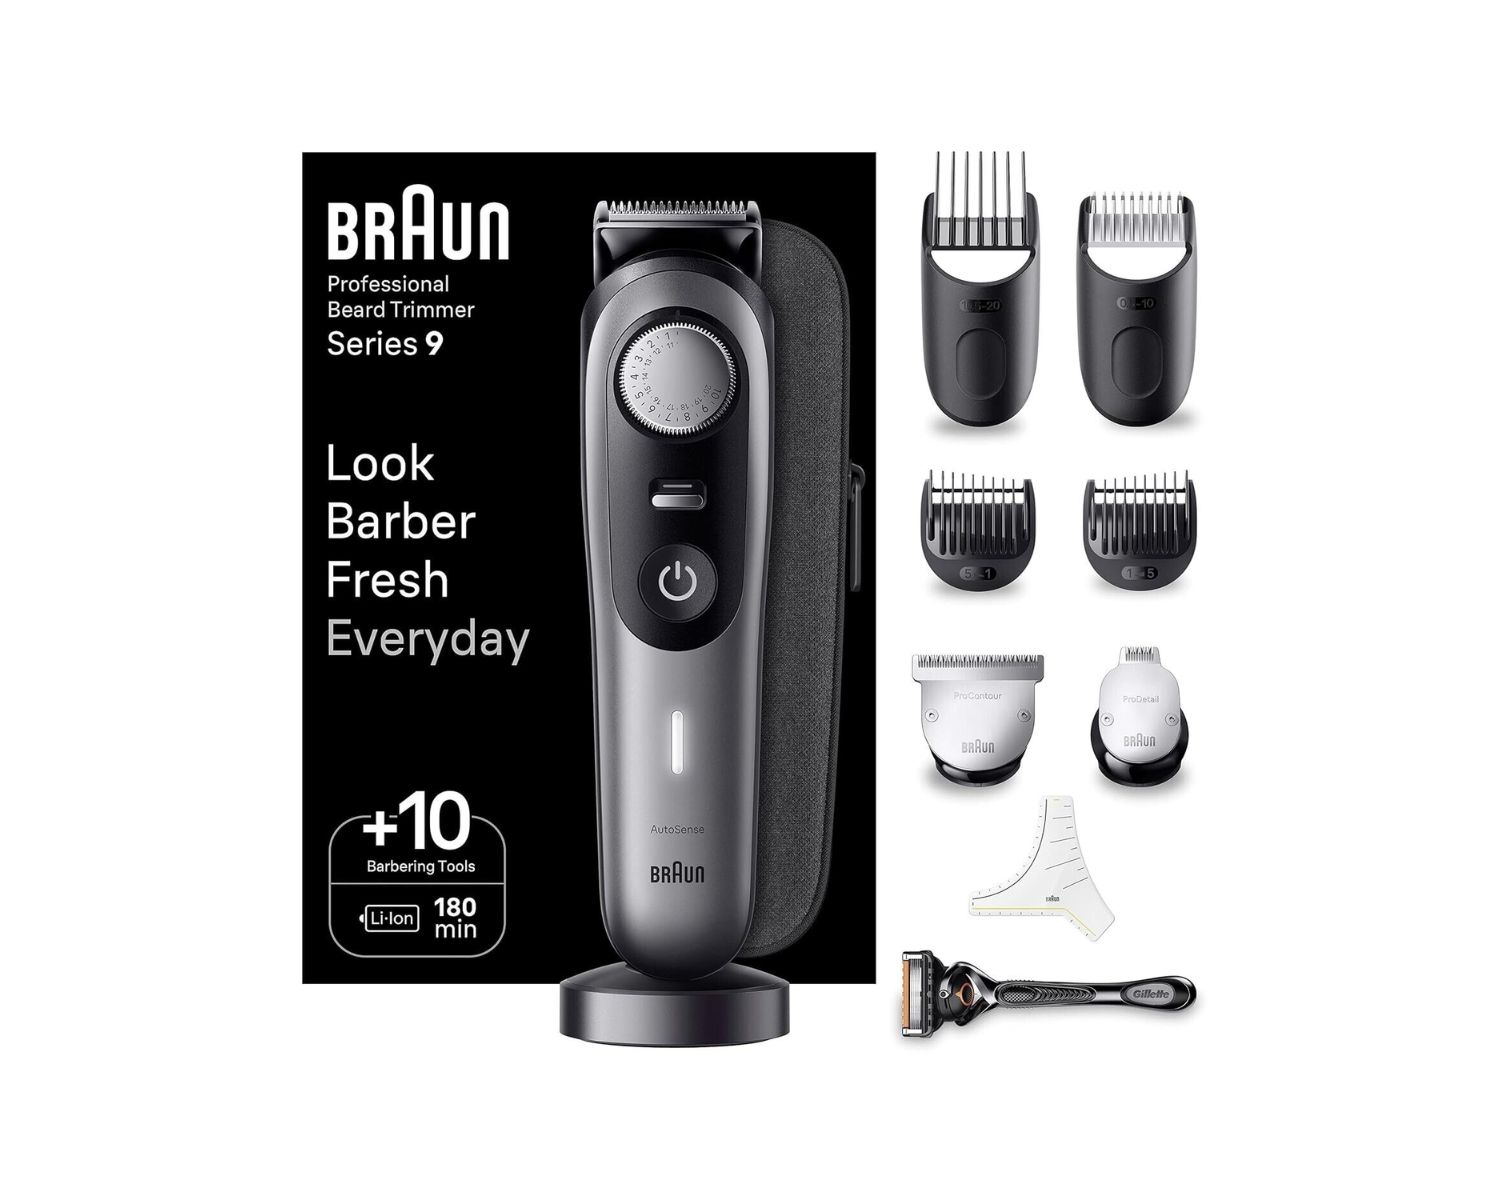 Beard Trimmer Review: The Best Trimmers for a Well-Groomed Look